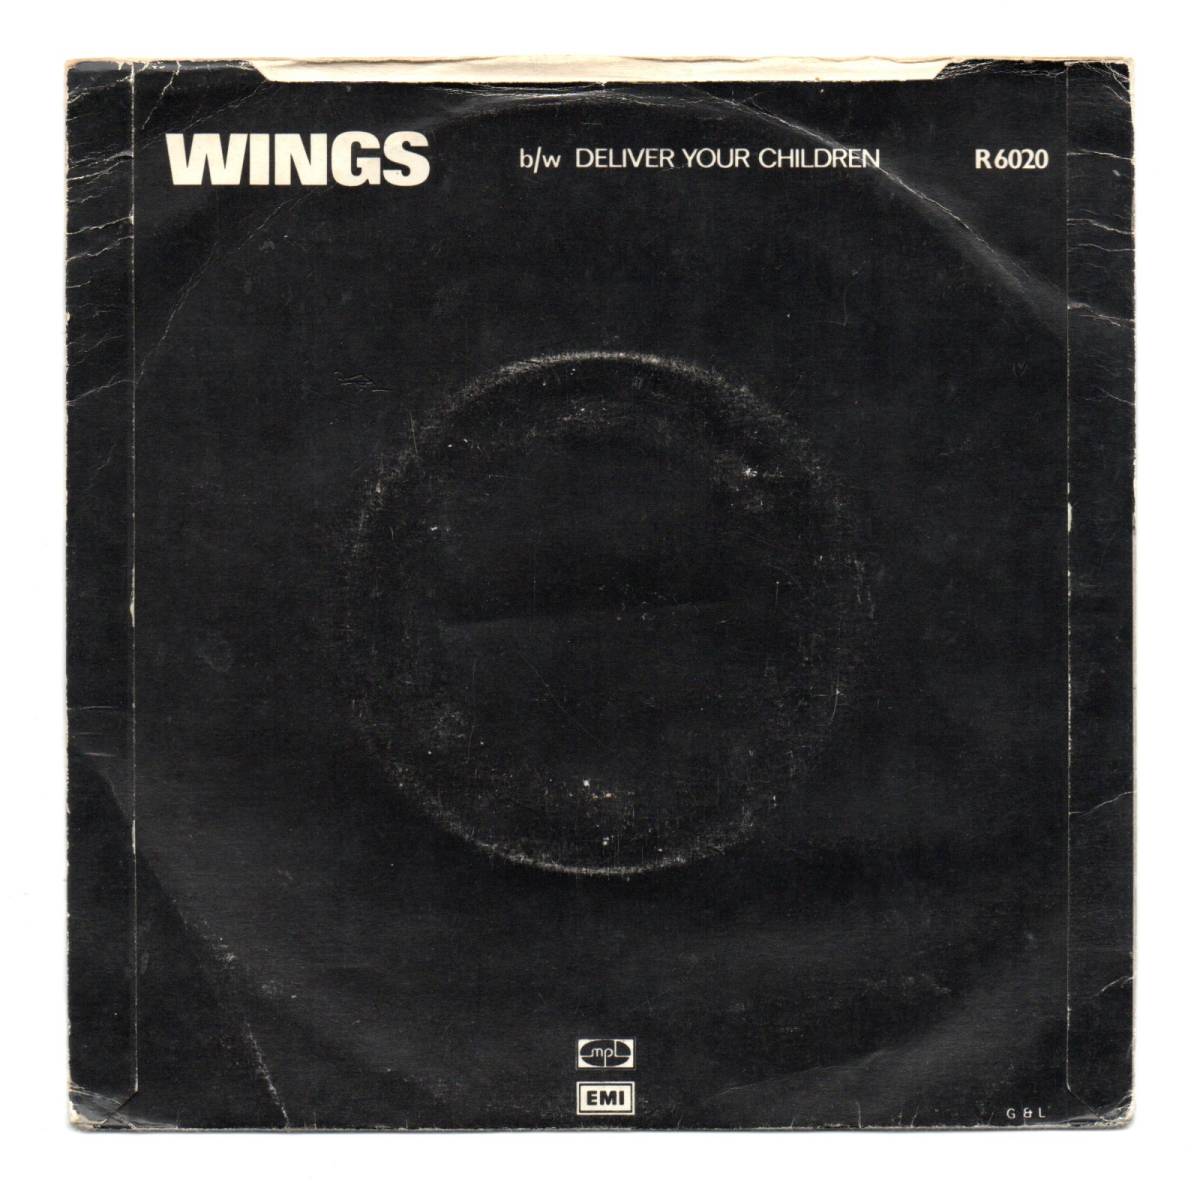 Paul McCartney & Wings - I've Had Enough/Deliver Your Children (UK 7inch) MPL R6020_画像2